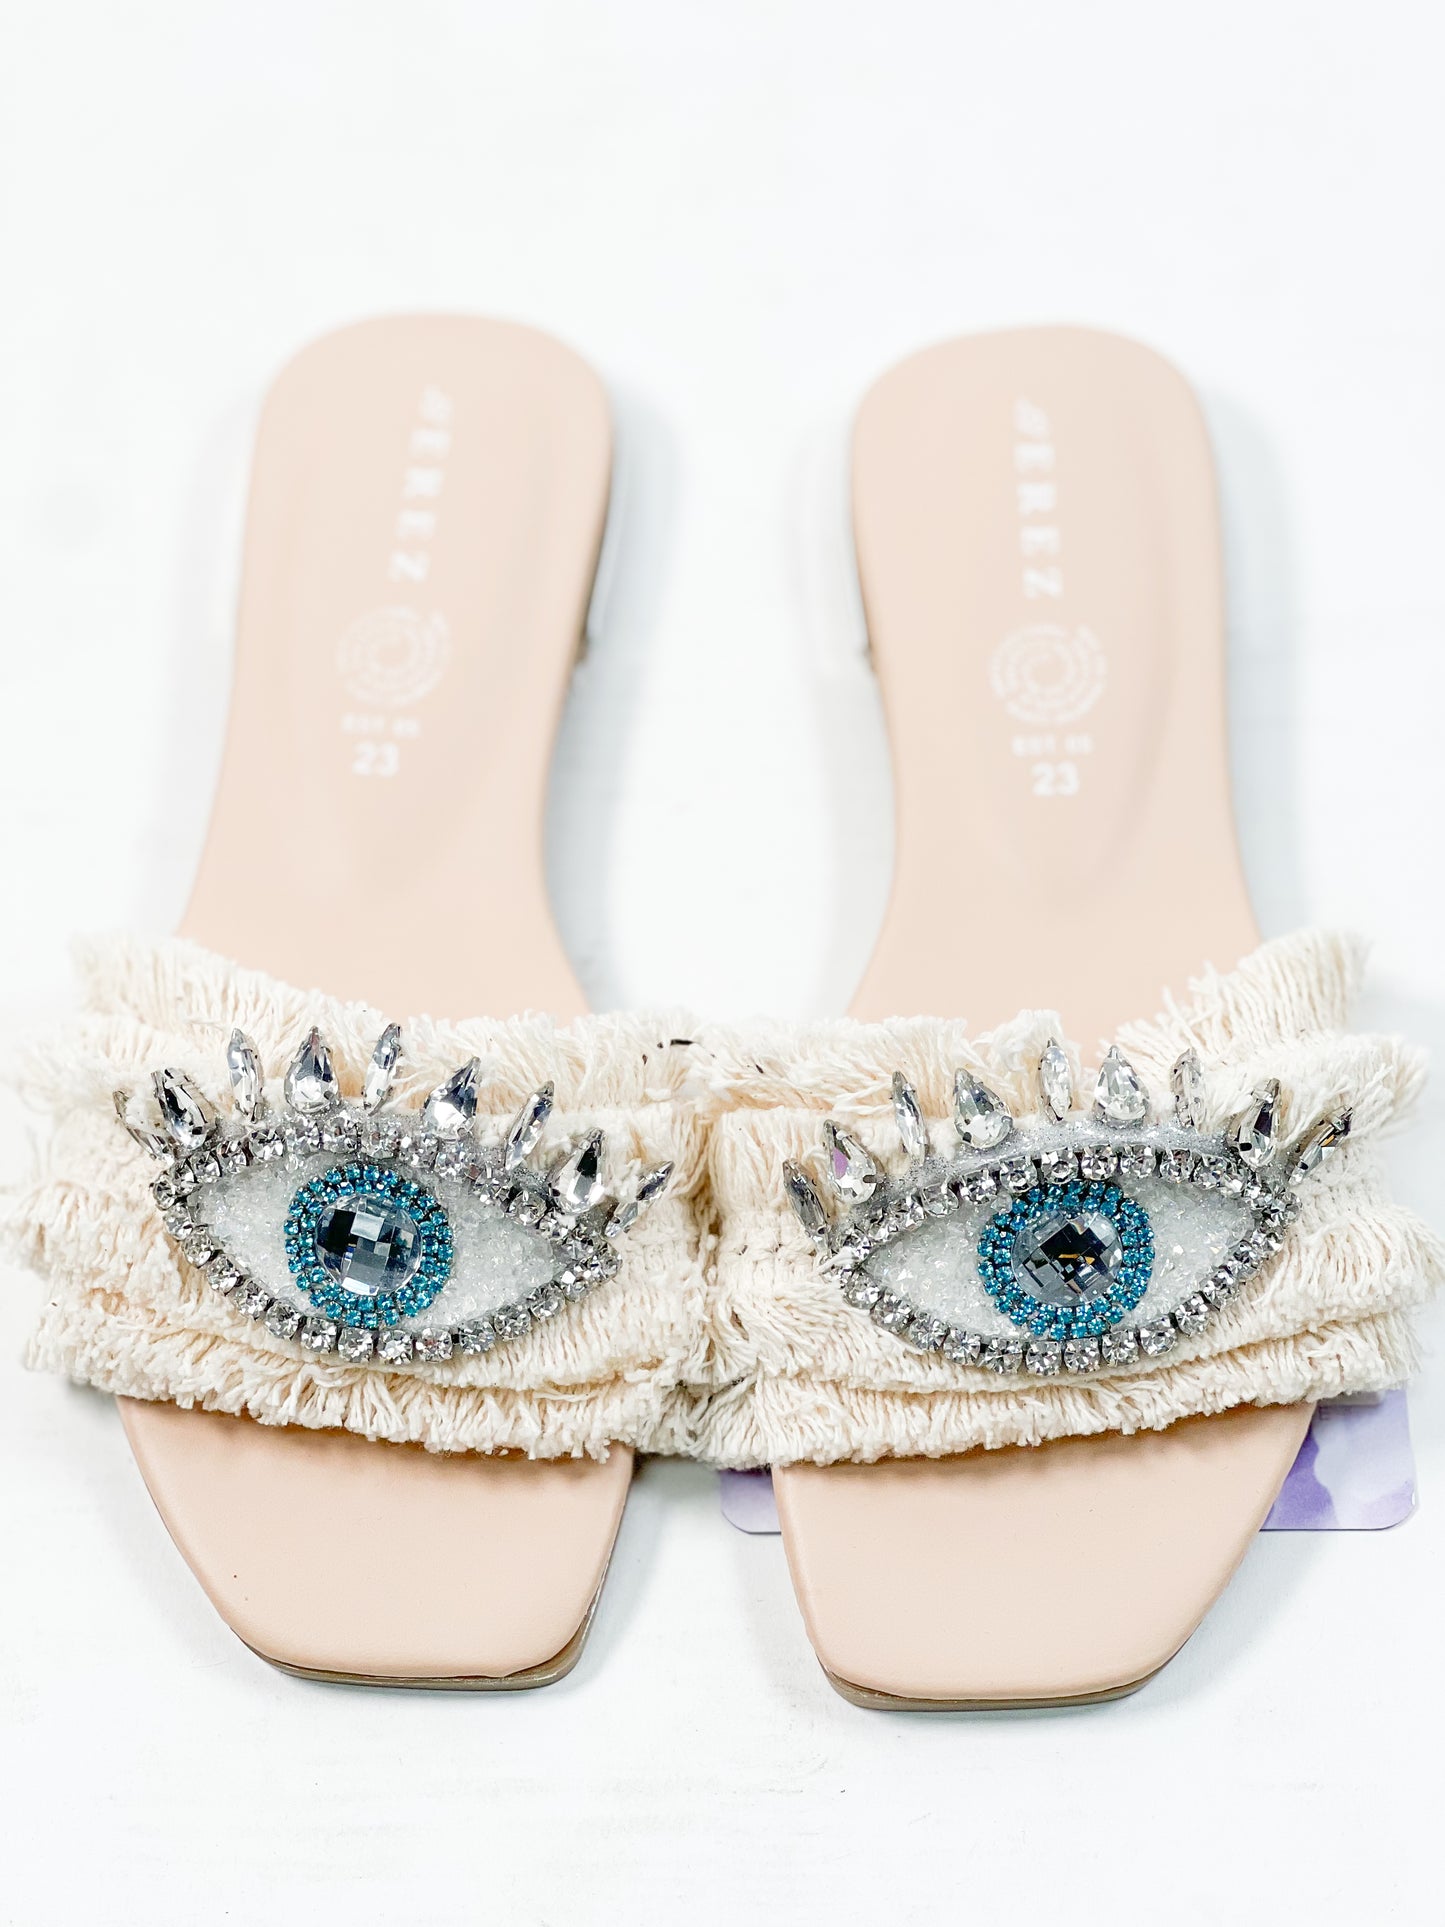 Sandals with Eye and Bangs